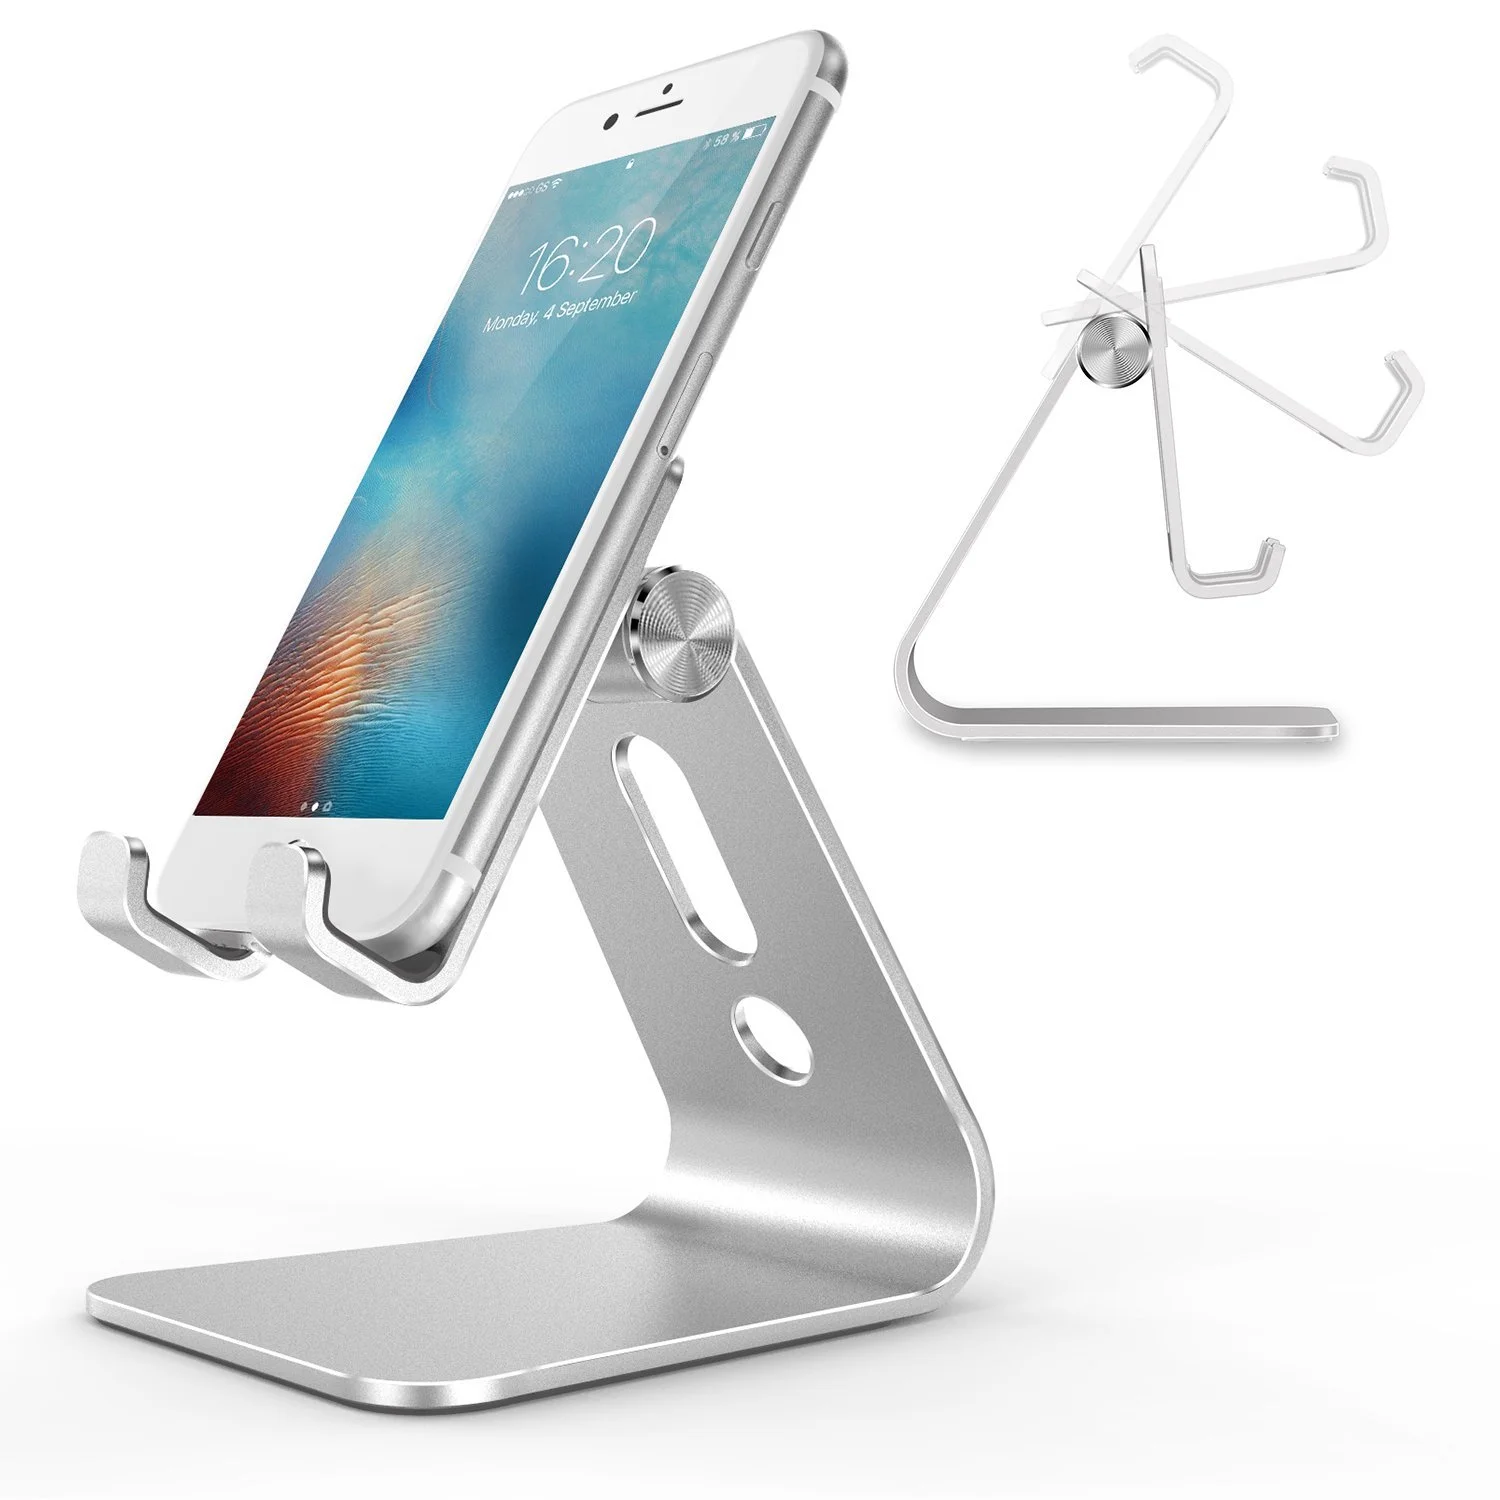 

Adjustable Cell Phone Stand, Aluminum Desktop Cellphone Stand with Anti-Slip Base and Convenient Charging Port